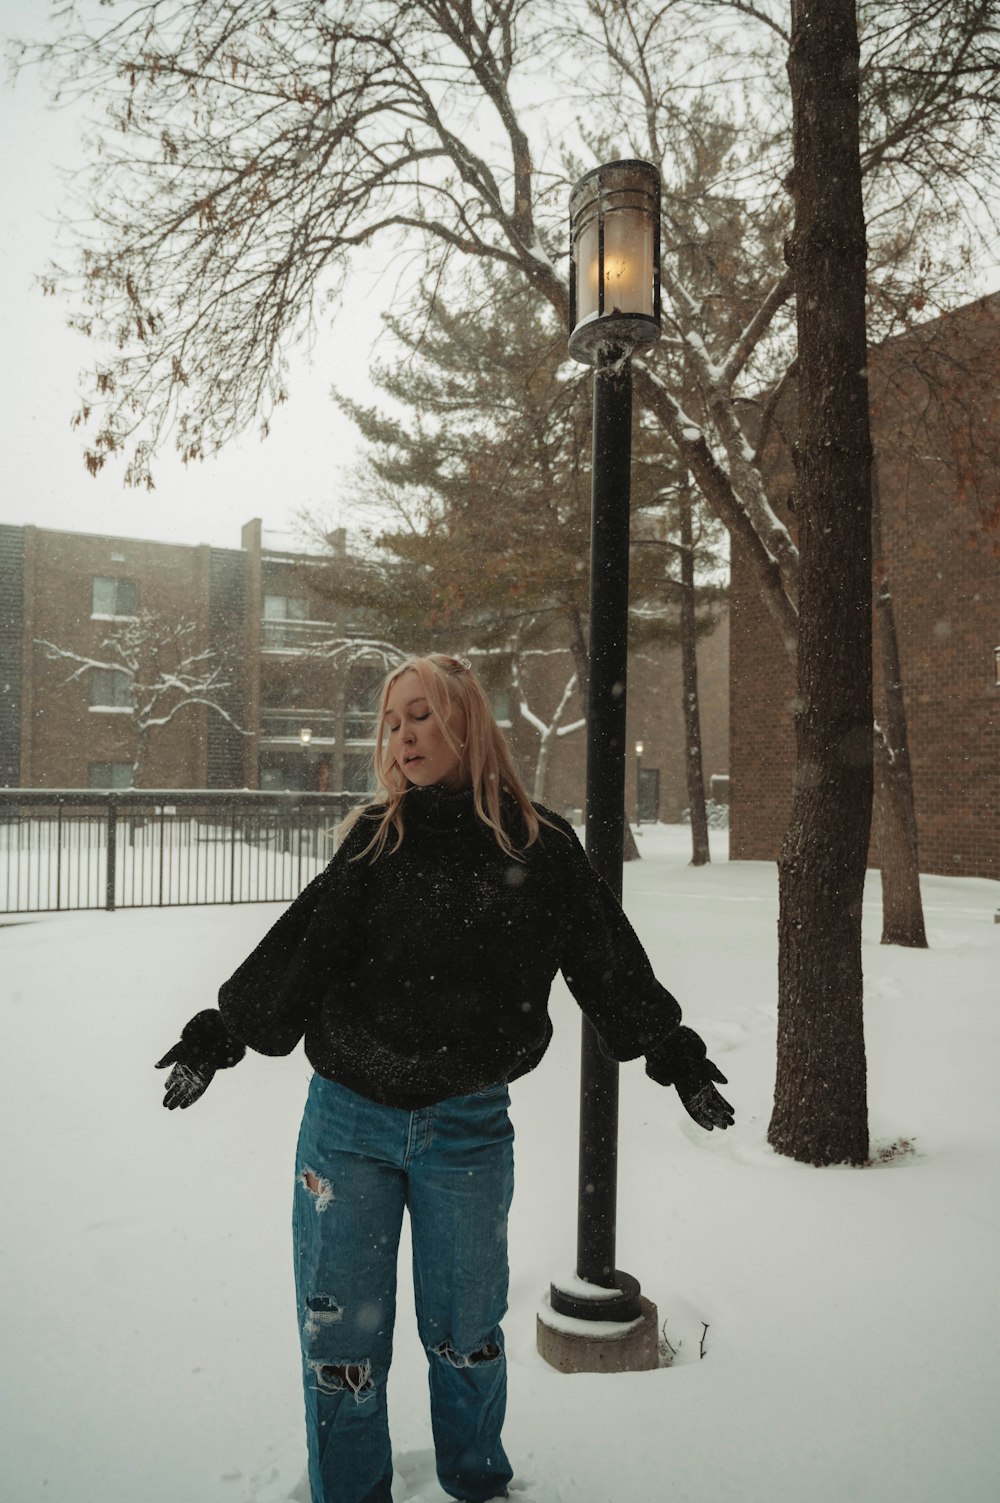 a woman standing in the snow next to a lamp post